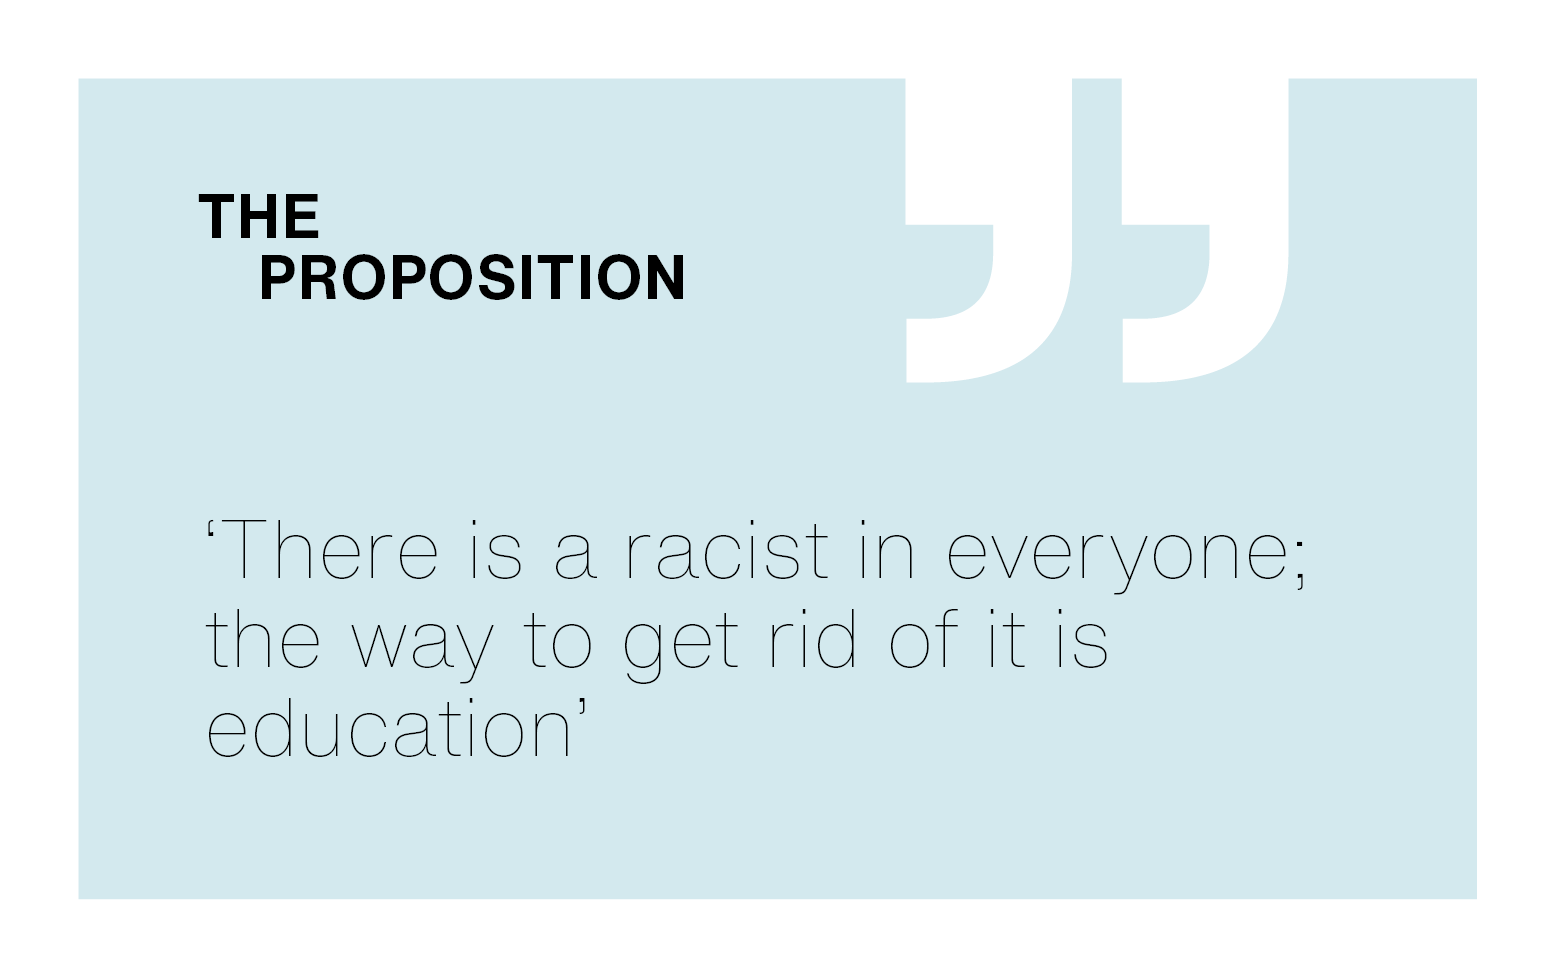 [The Proposition]: ‘There is a racist in everyone: the way to get rid of it is education.’